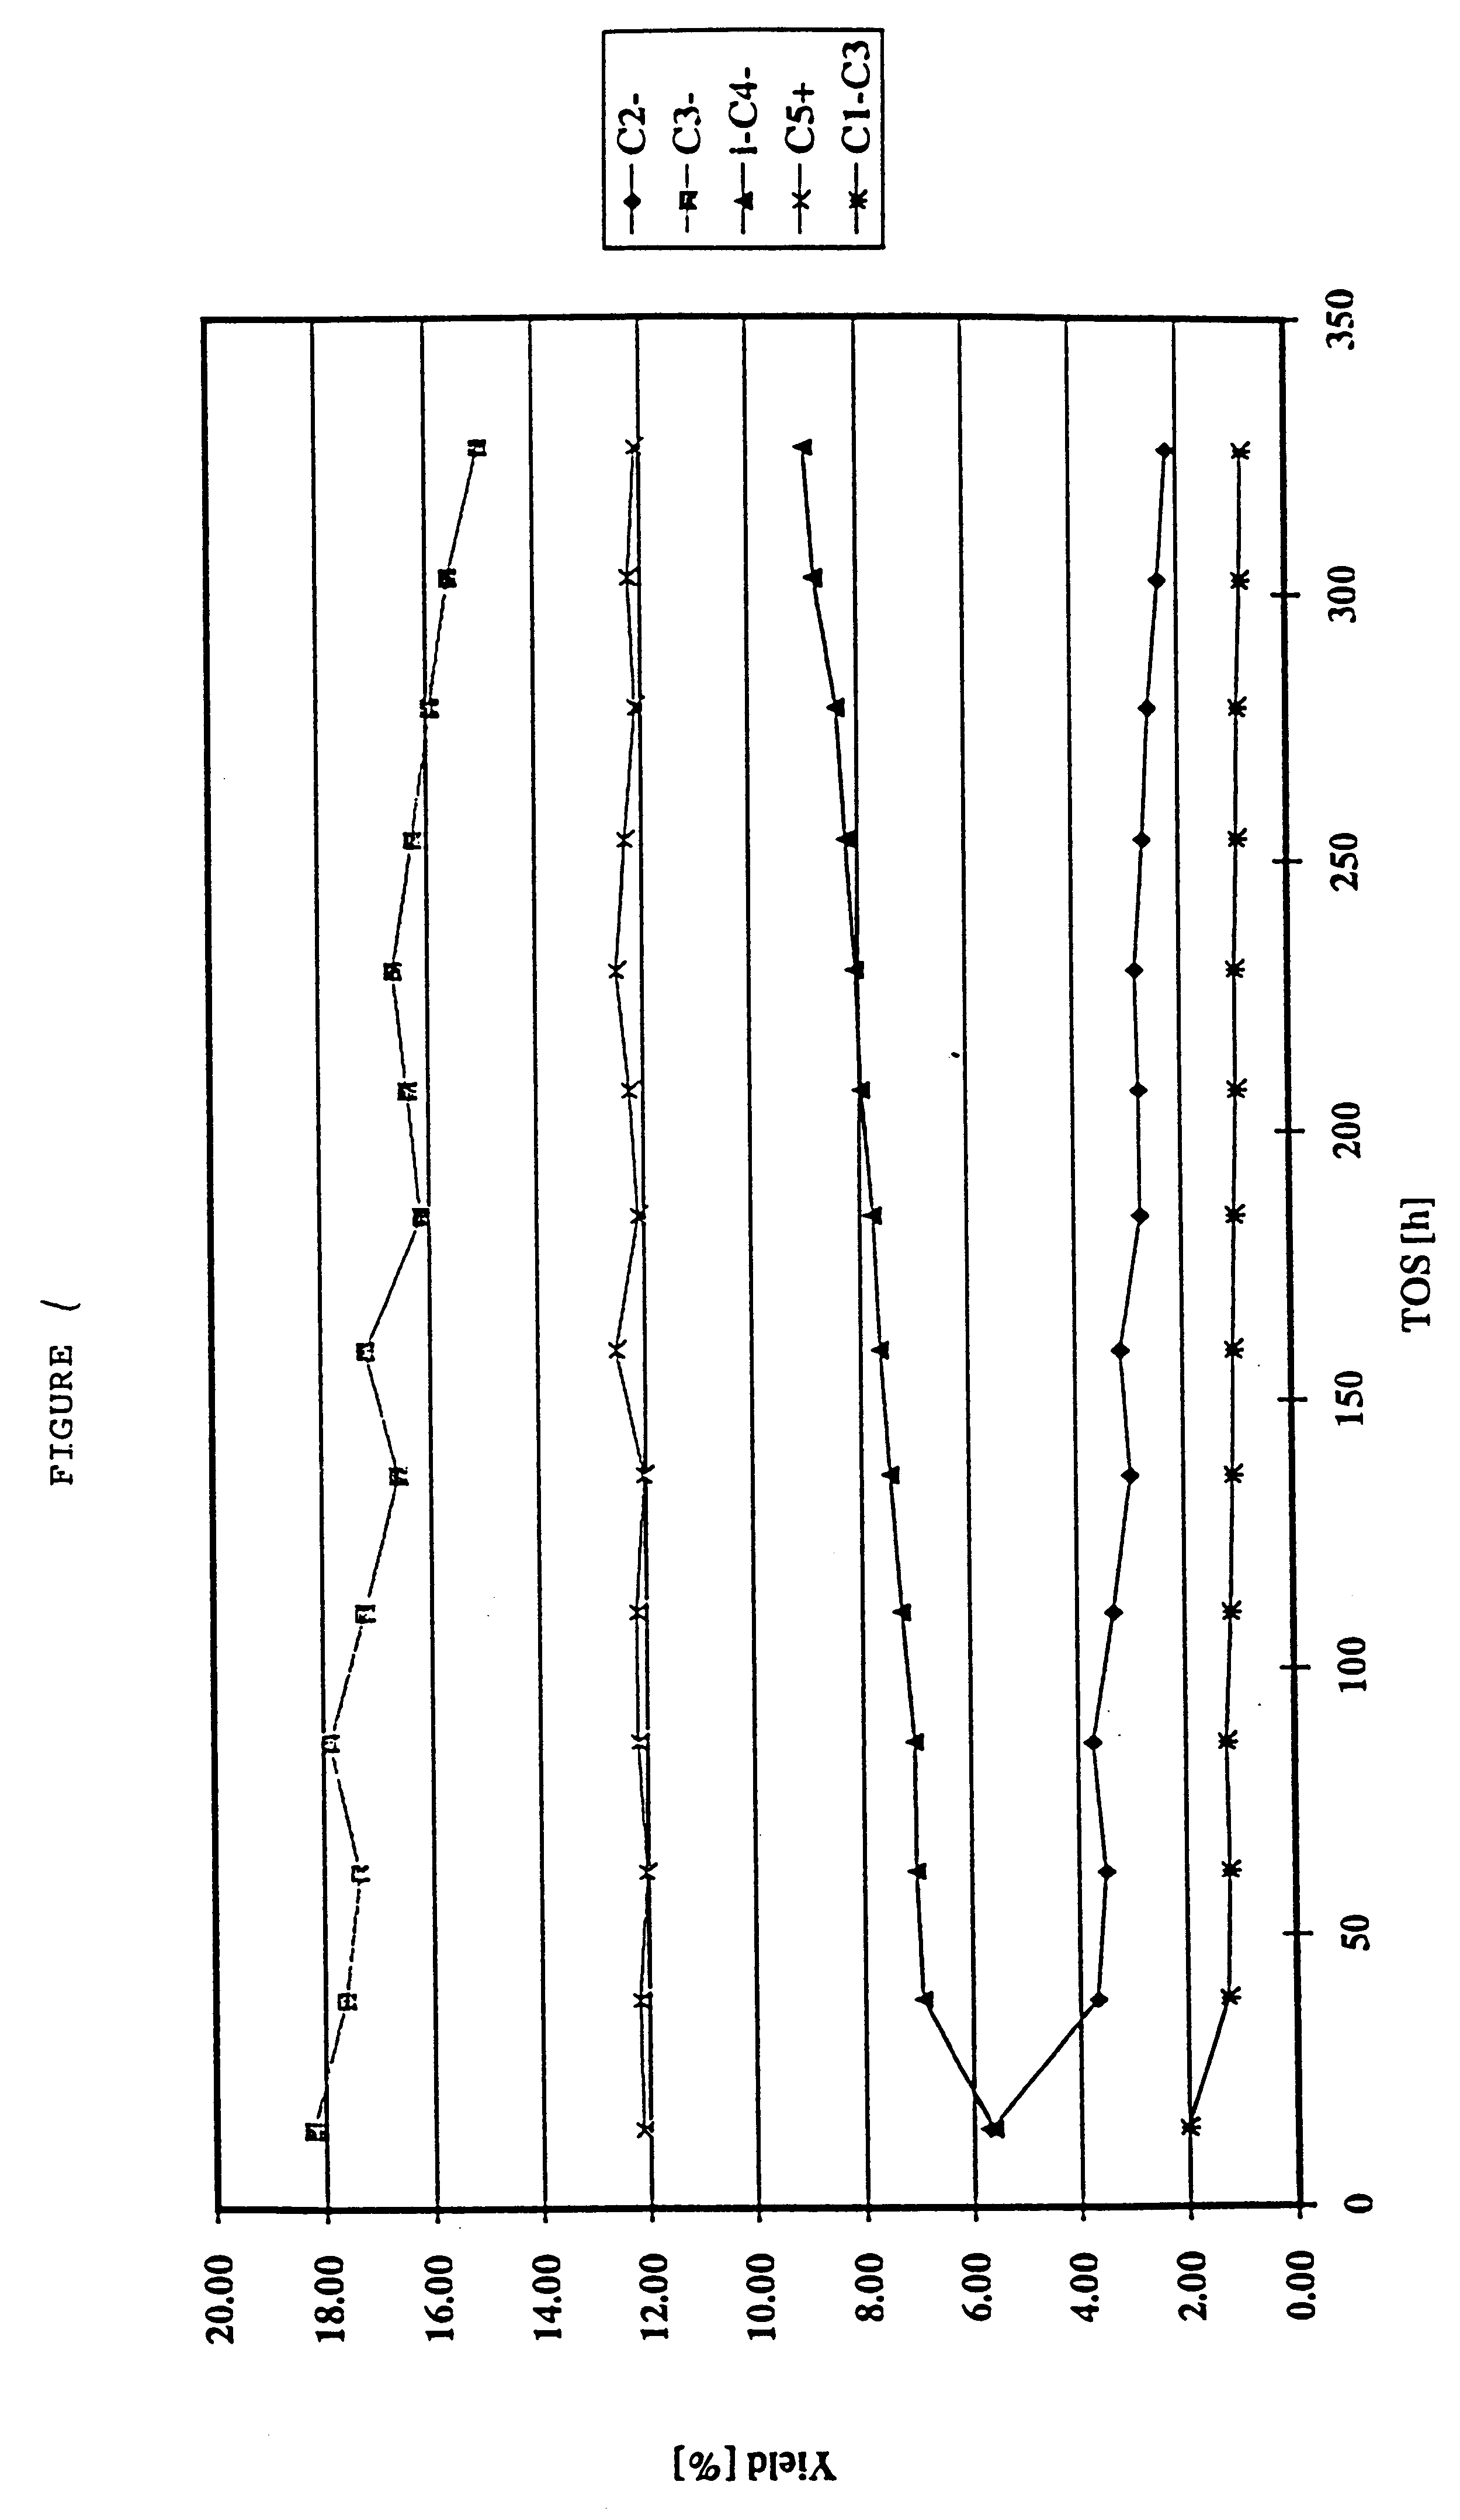 Production of olefins